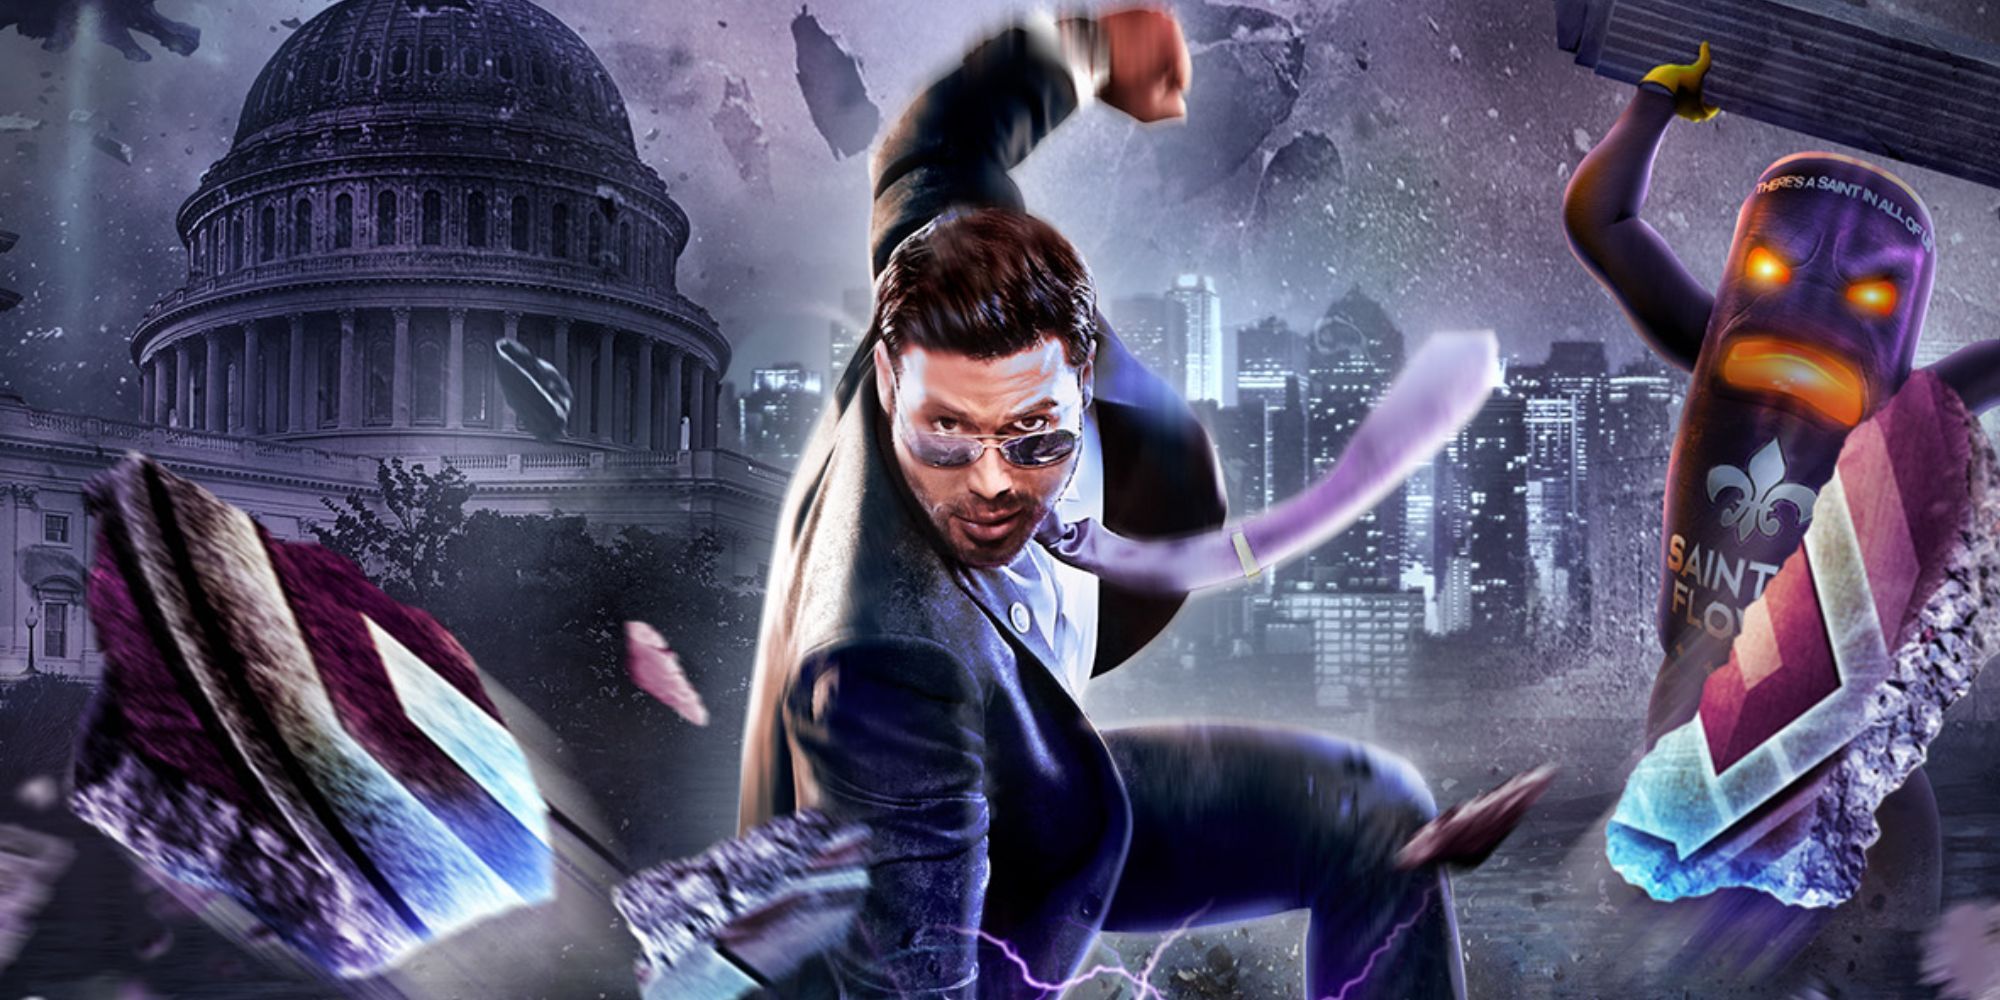 Saints Row 4 Game Logo Zoomed In